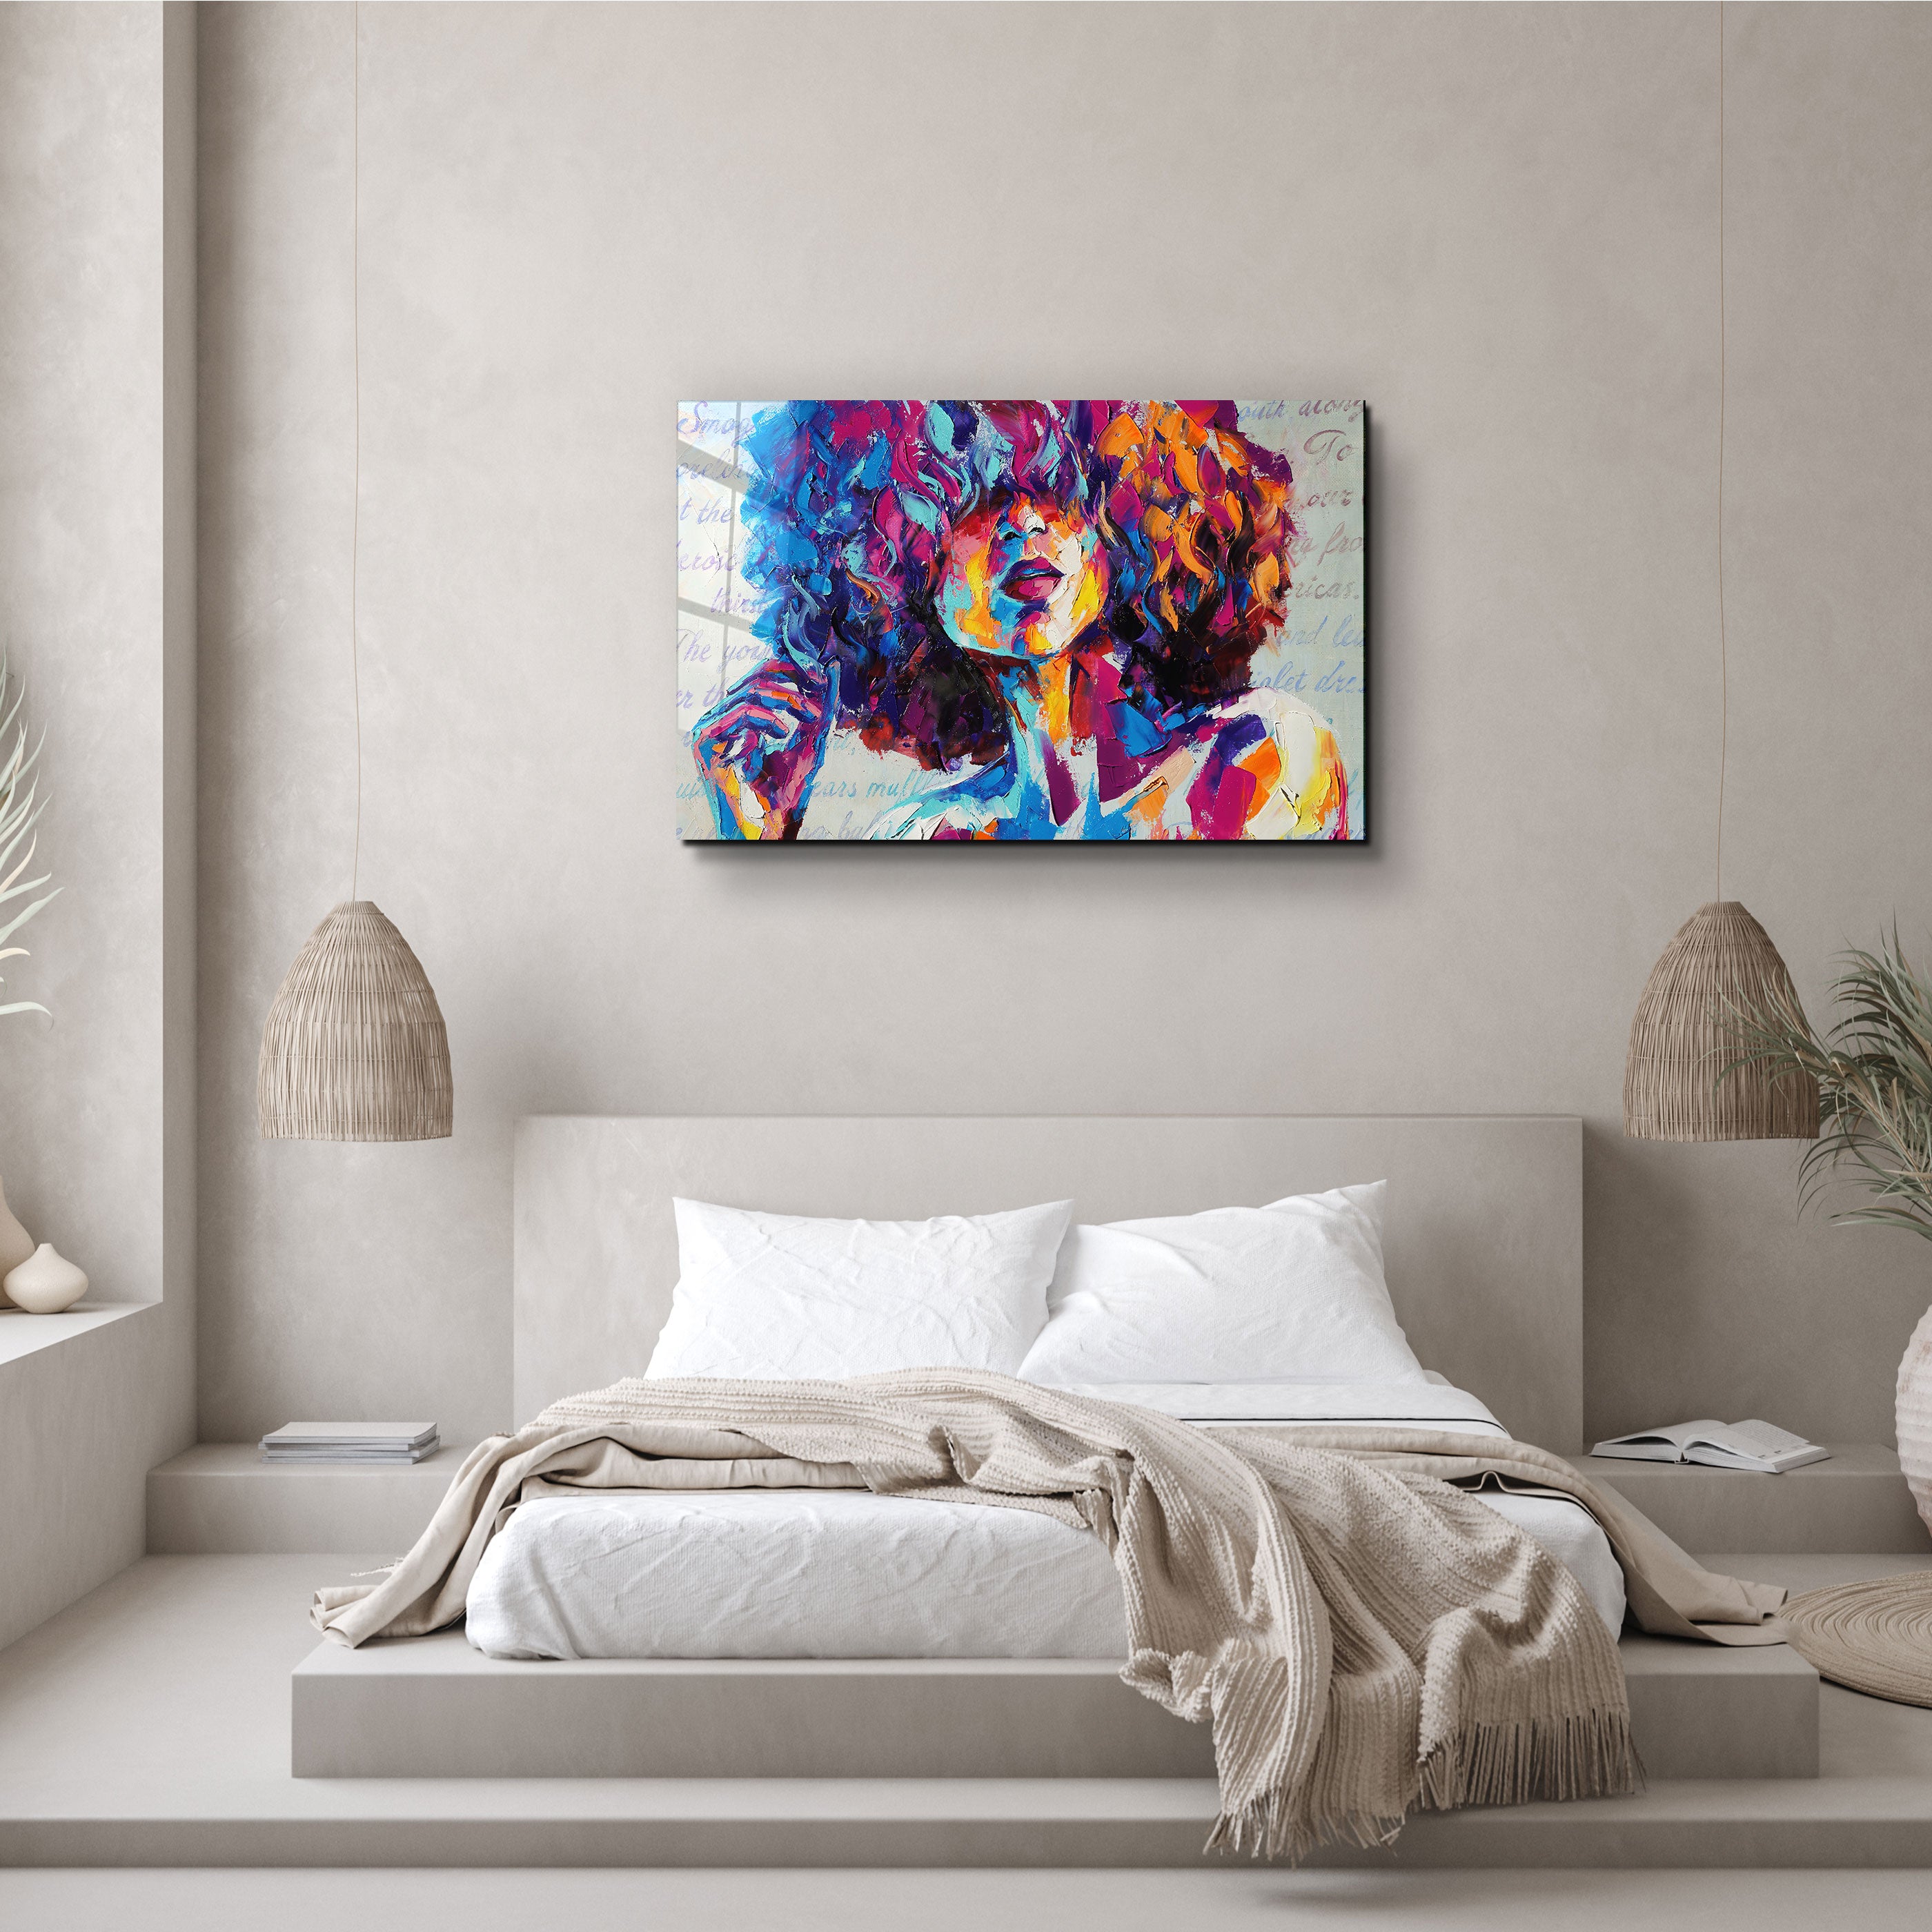 ・"Abstract Painting"・Glass Wall Art